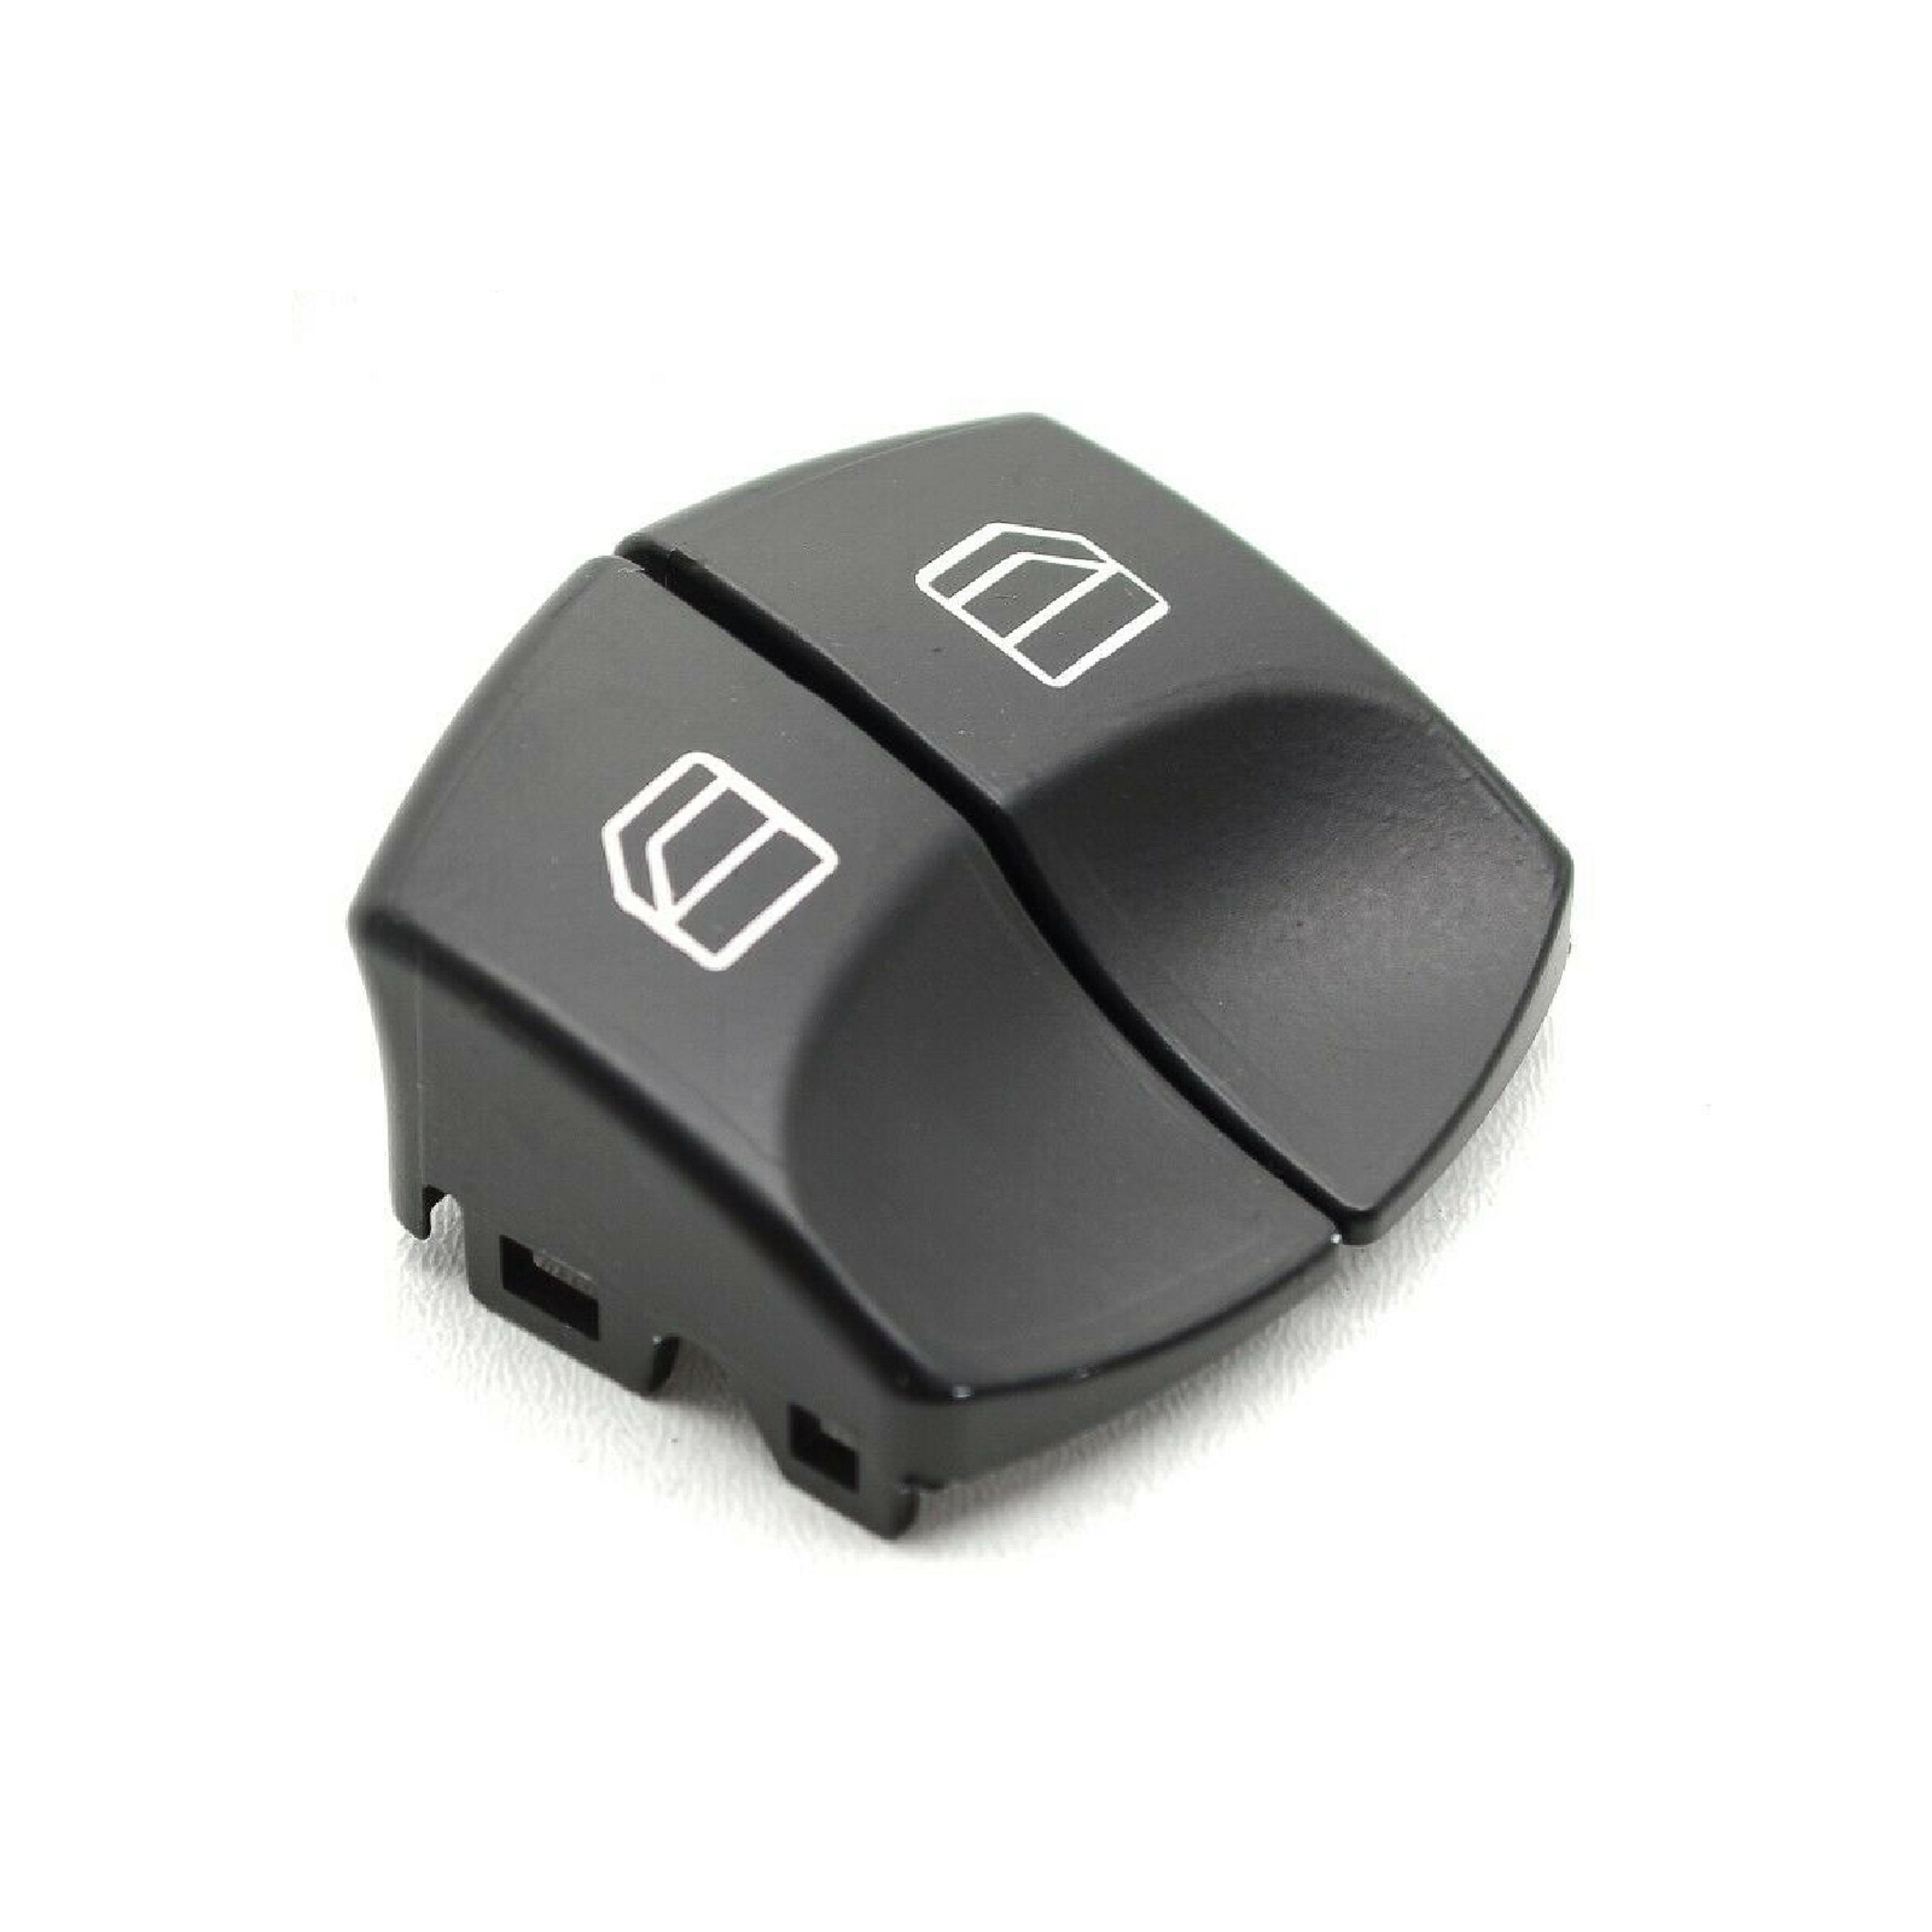 Crafter Mercedes Sprinter W906 Vw Crafter Window Switch Button Cover Cap Passenger Side 